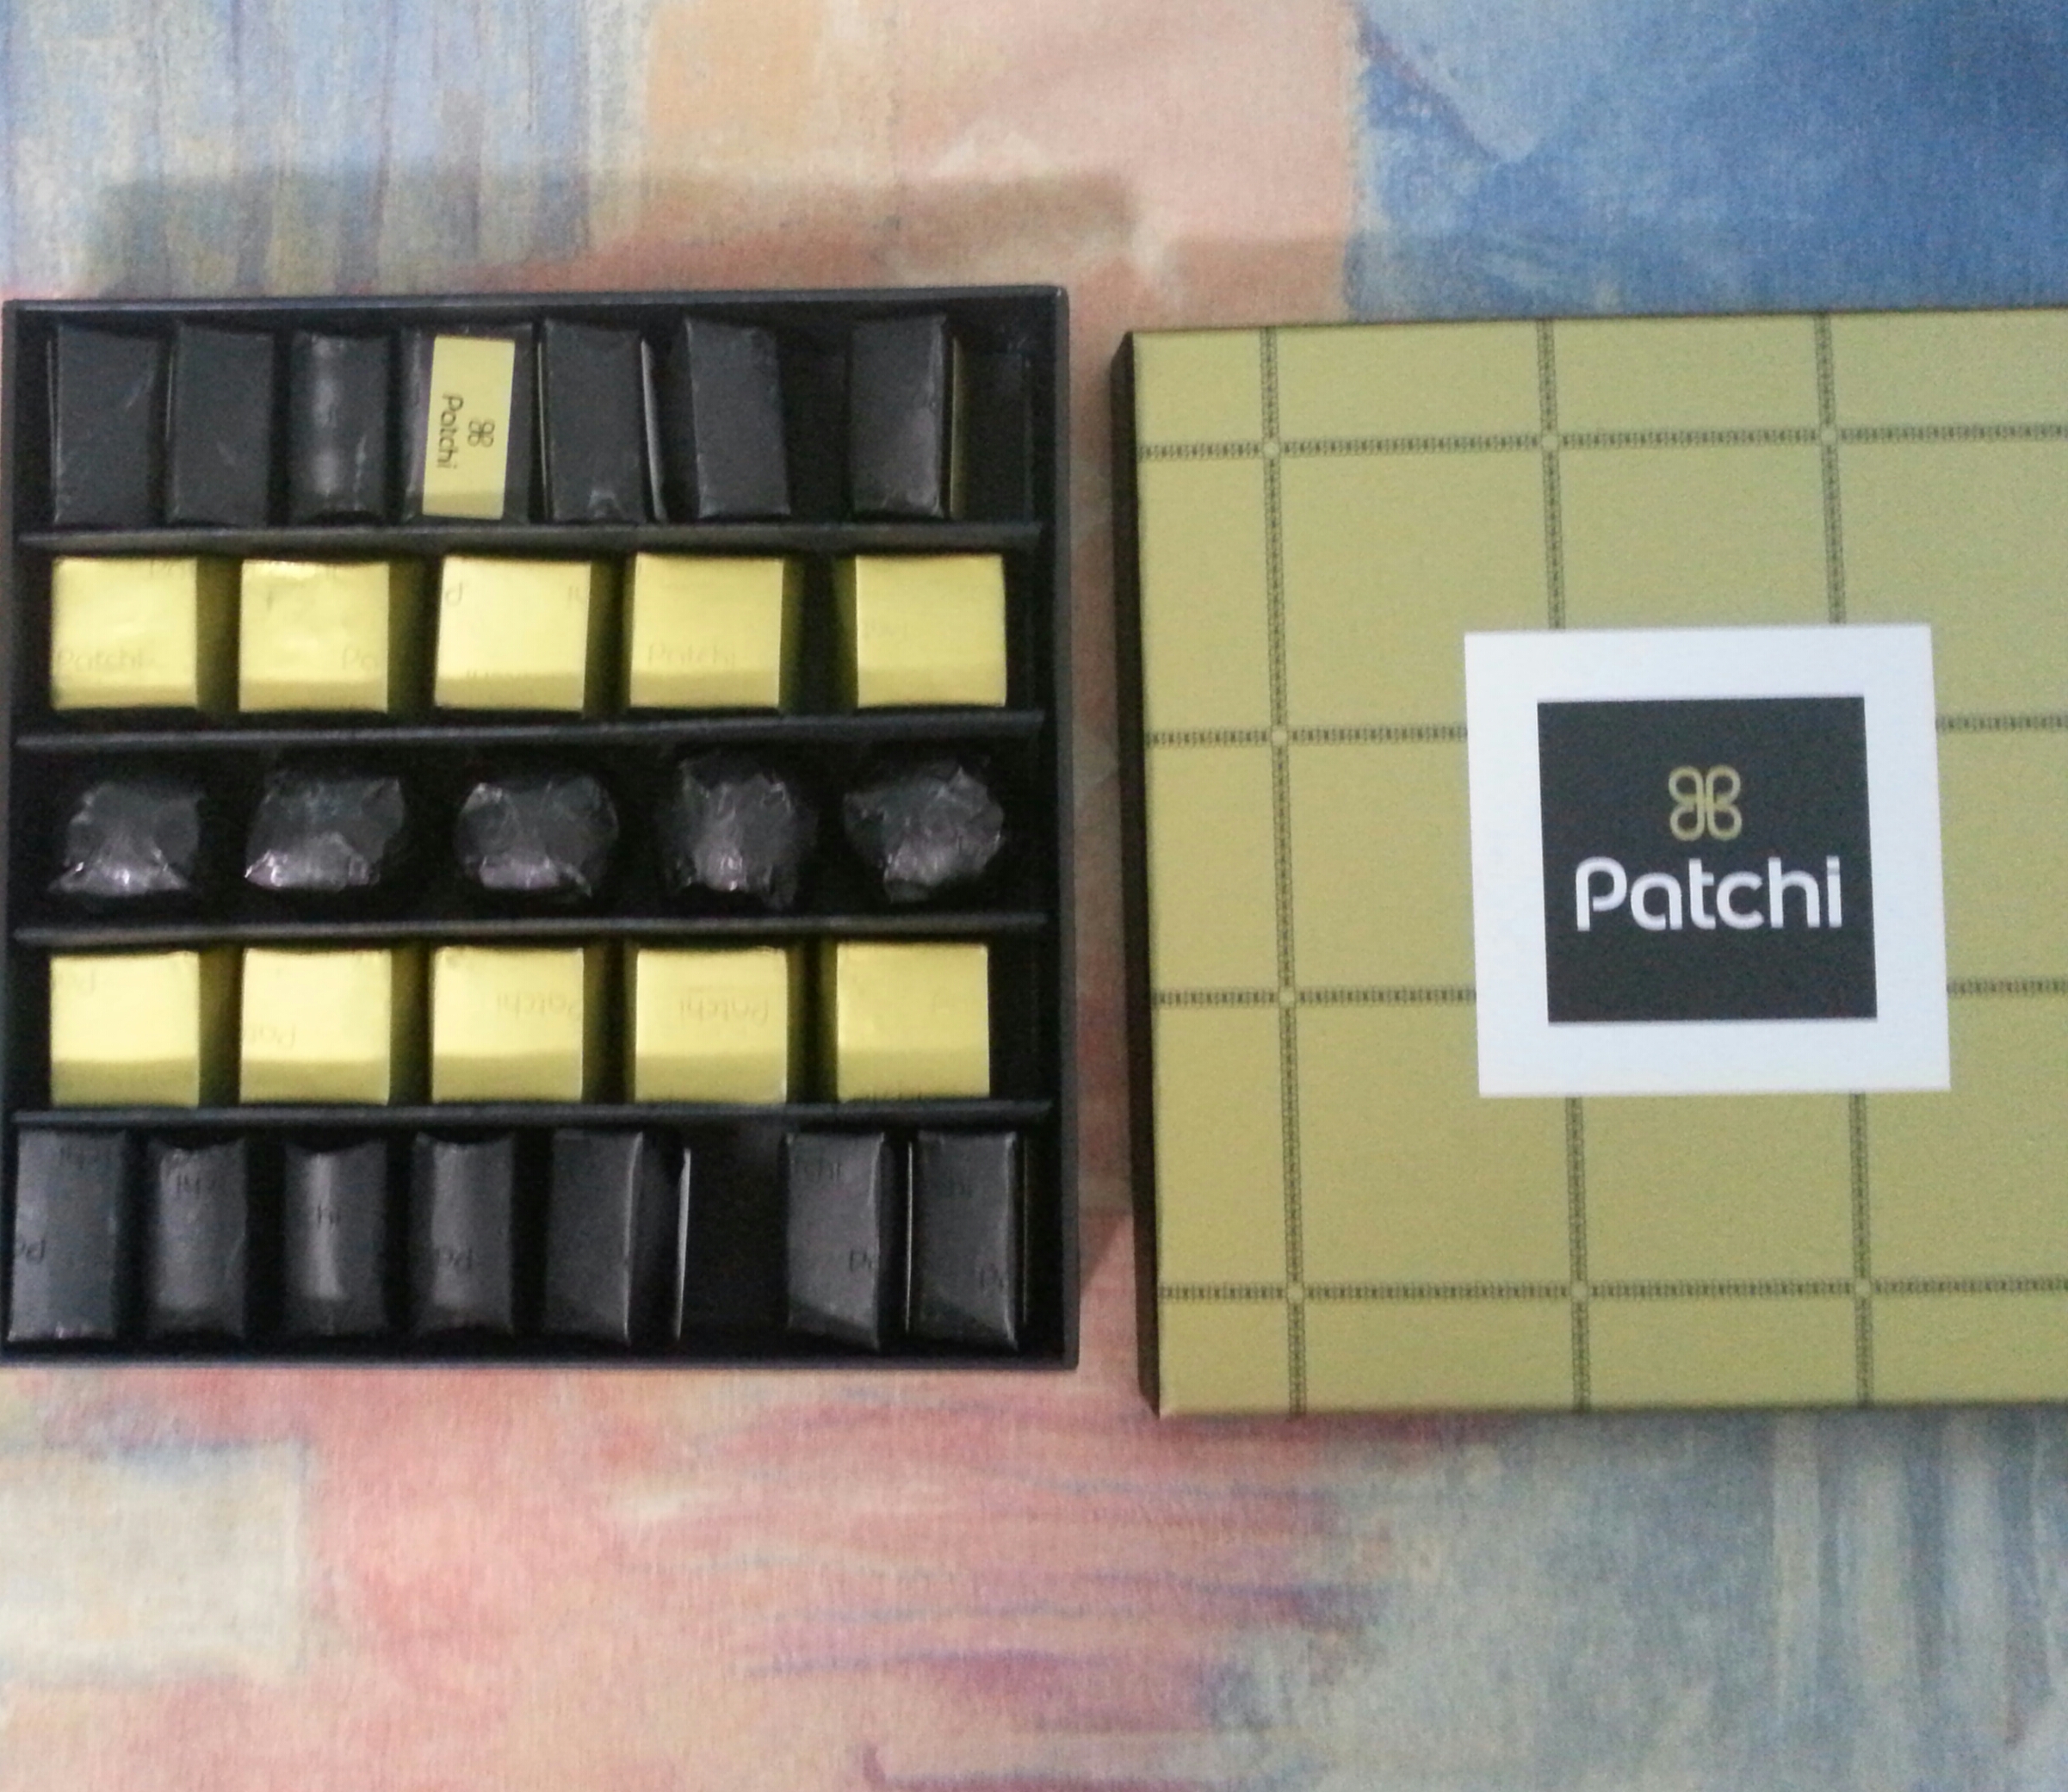 Philippines patchi chocolate Interview: Chocolate